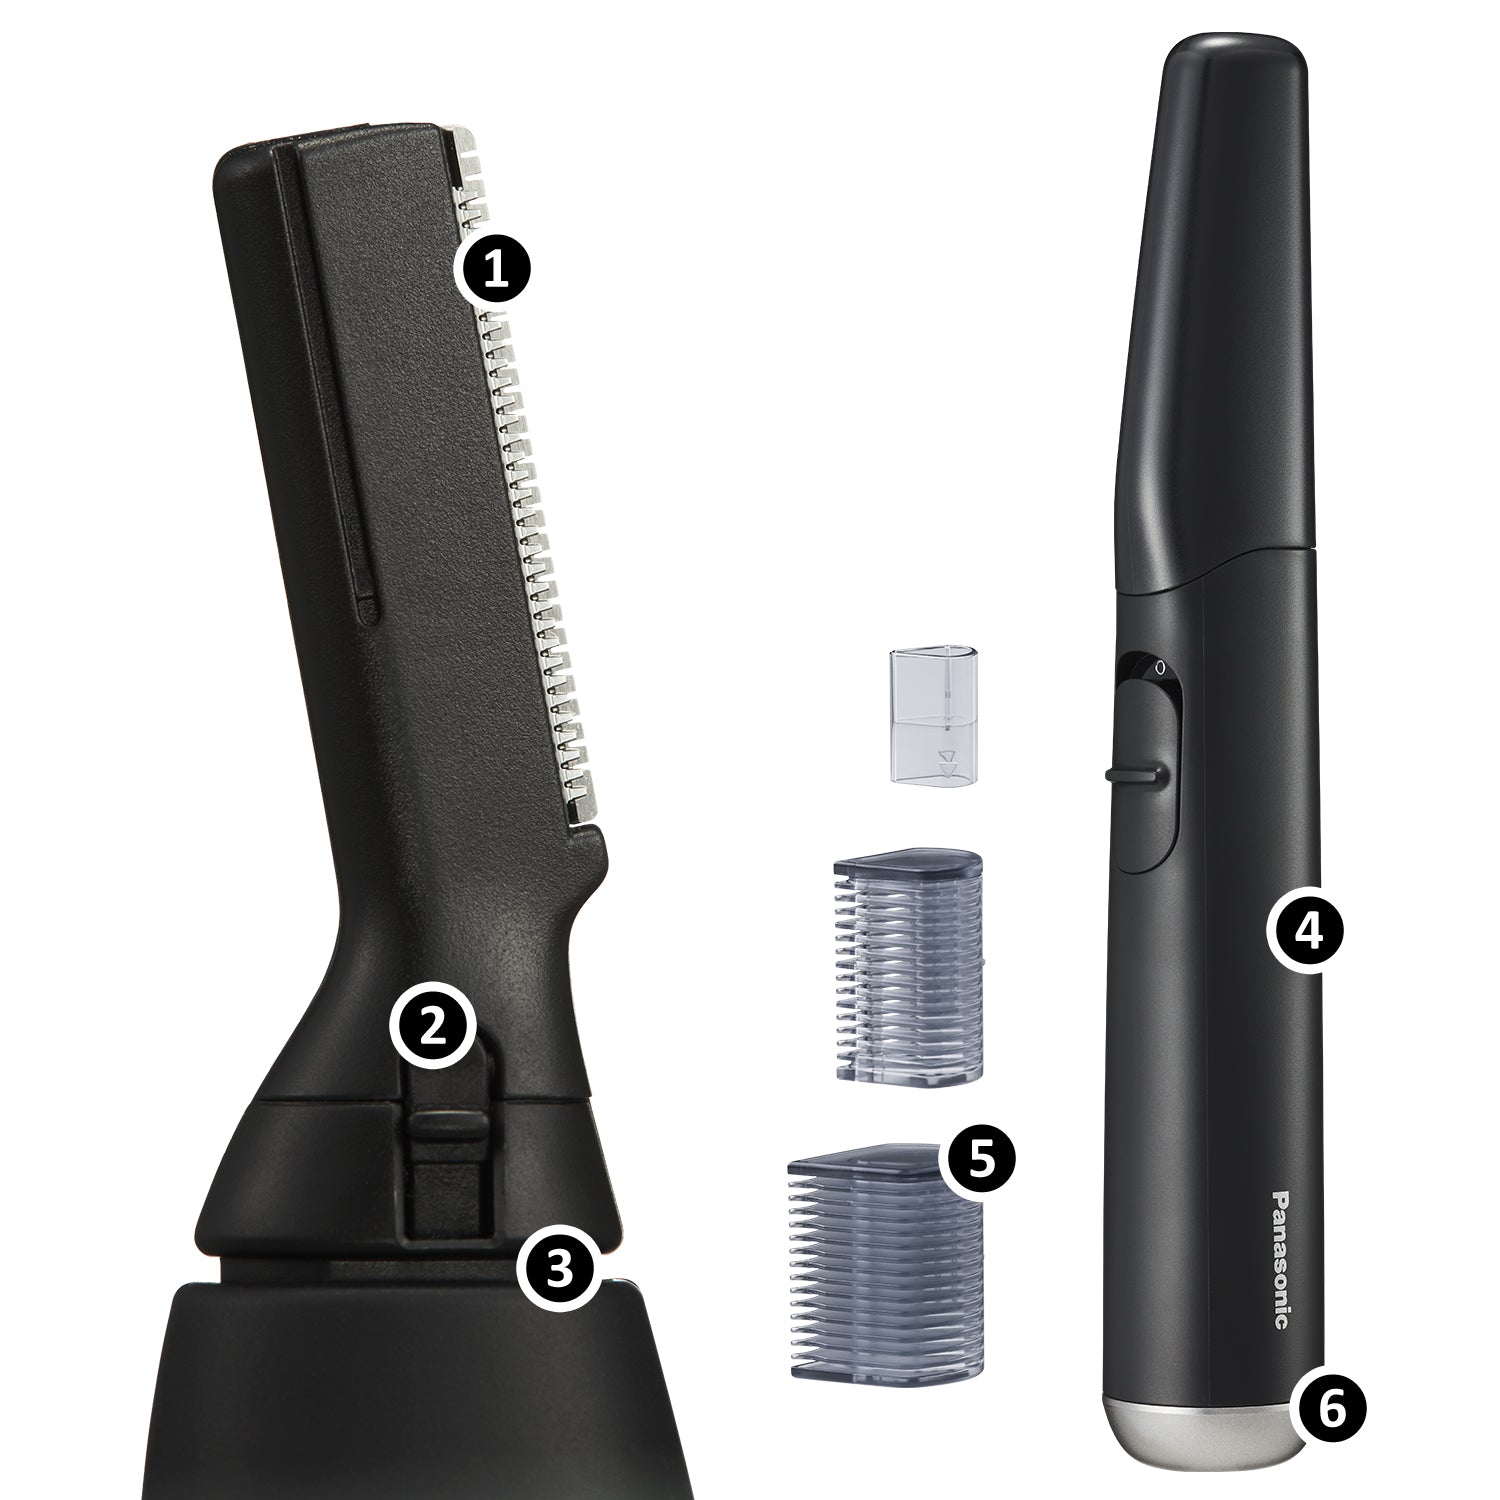 Panasonic Facial Hair Trimmer for Sensitive Skin and First-Time